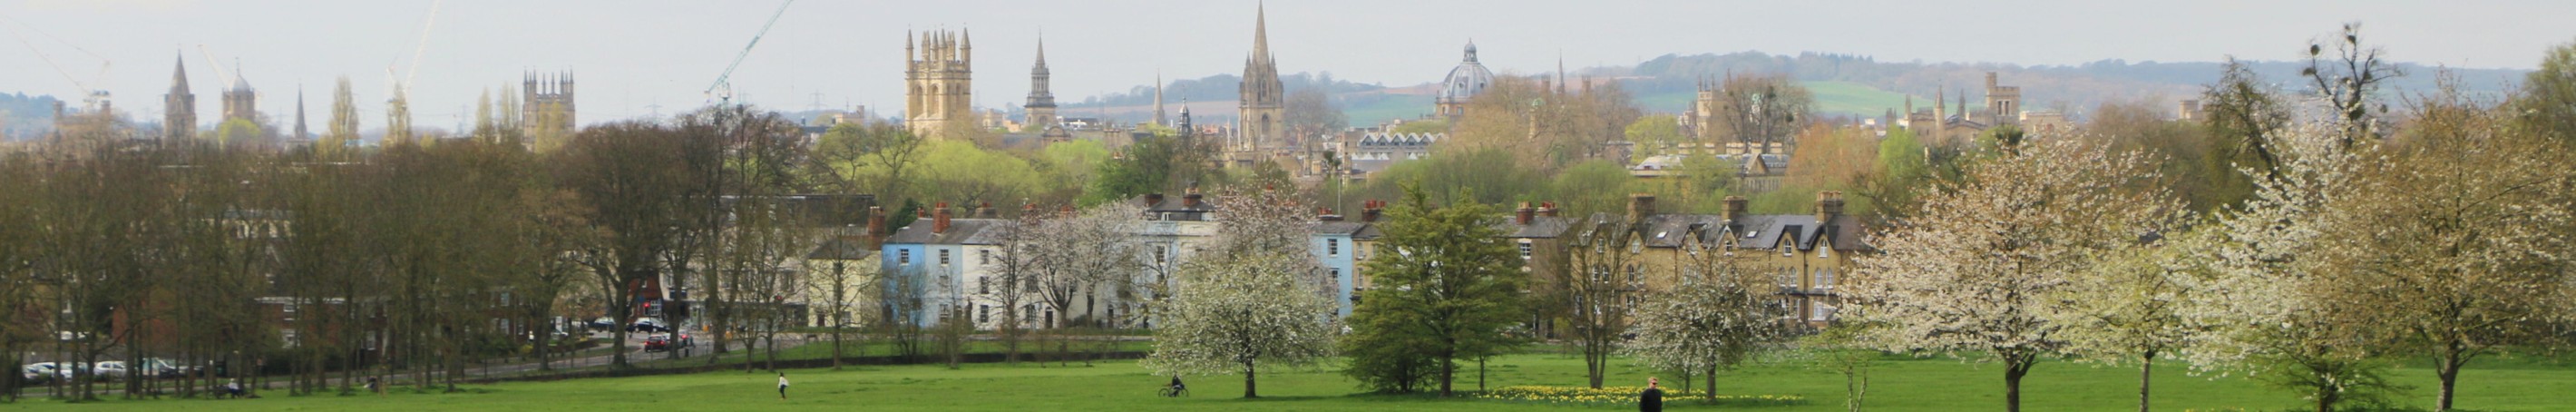 Picture of Oxford's dreaming spires from South Park